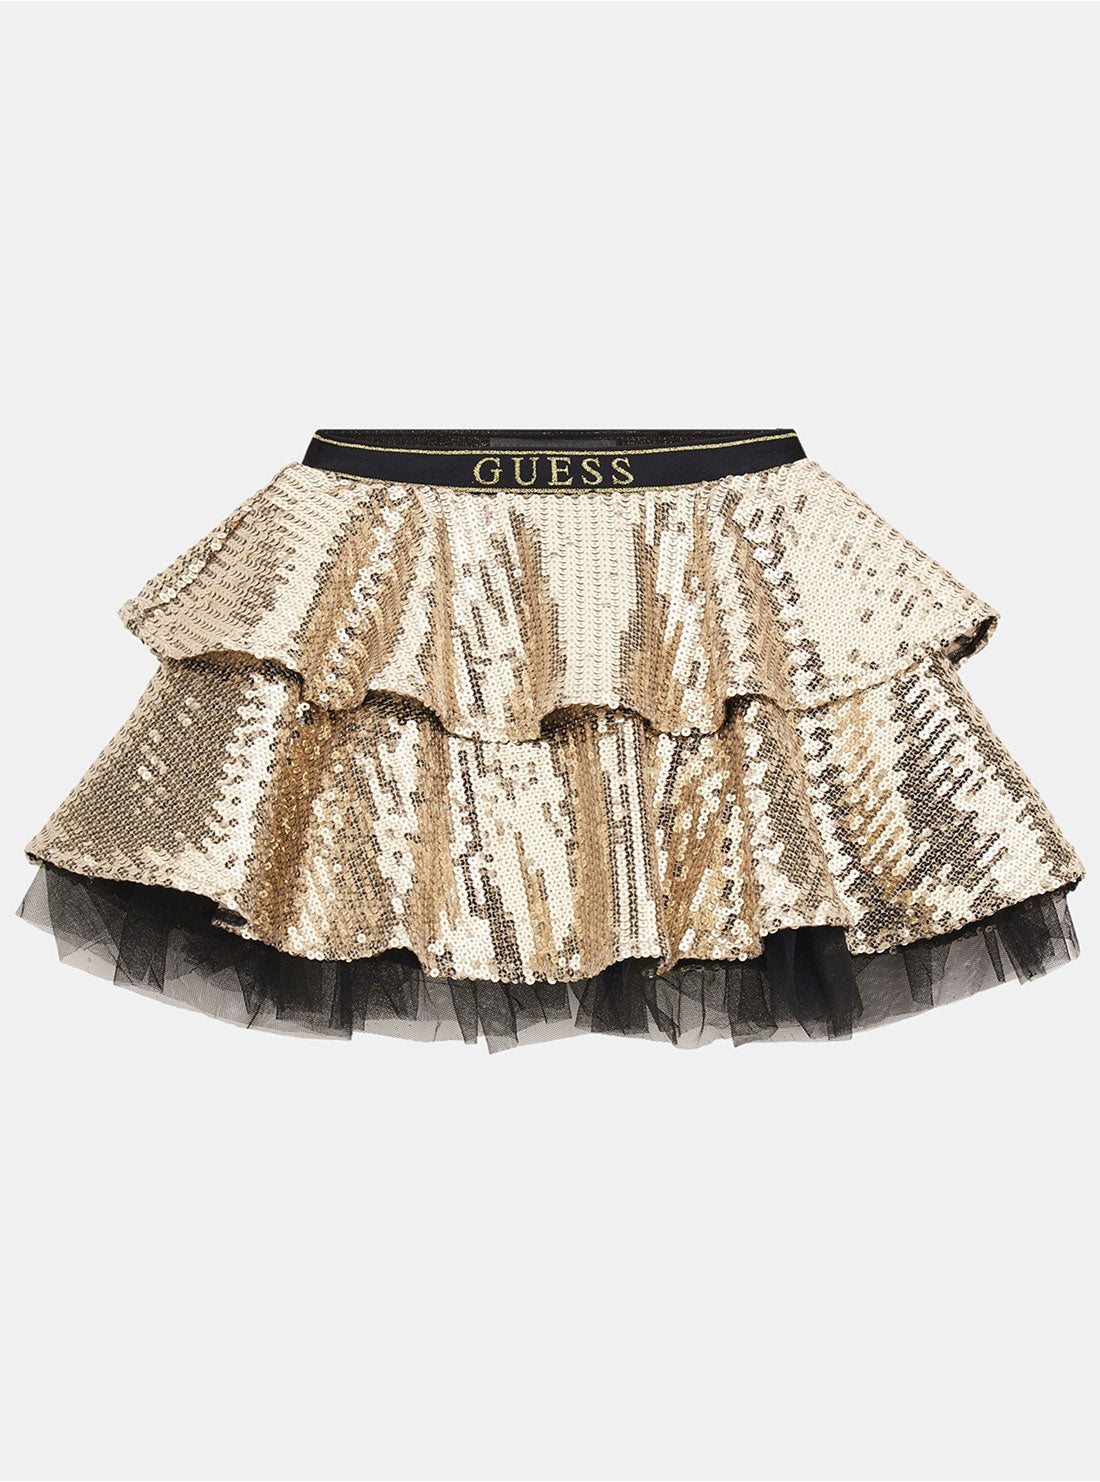 GUESS Gold Sequins Midi Skirt (2-7) front view